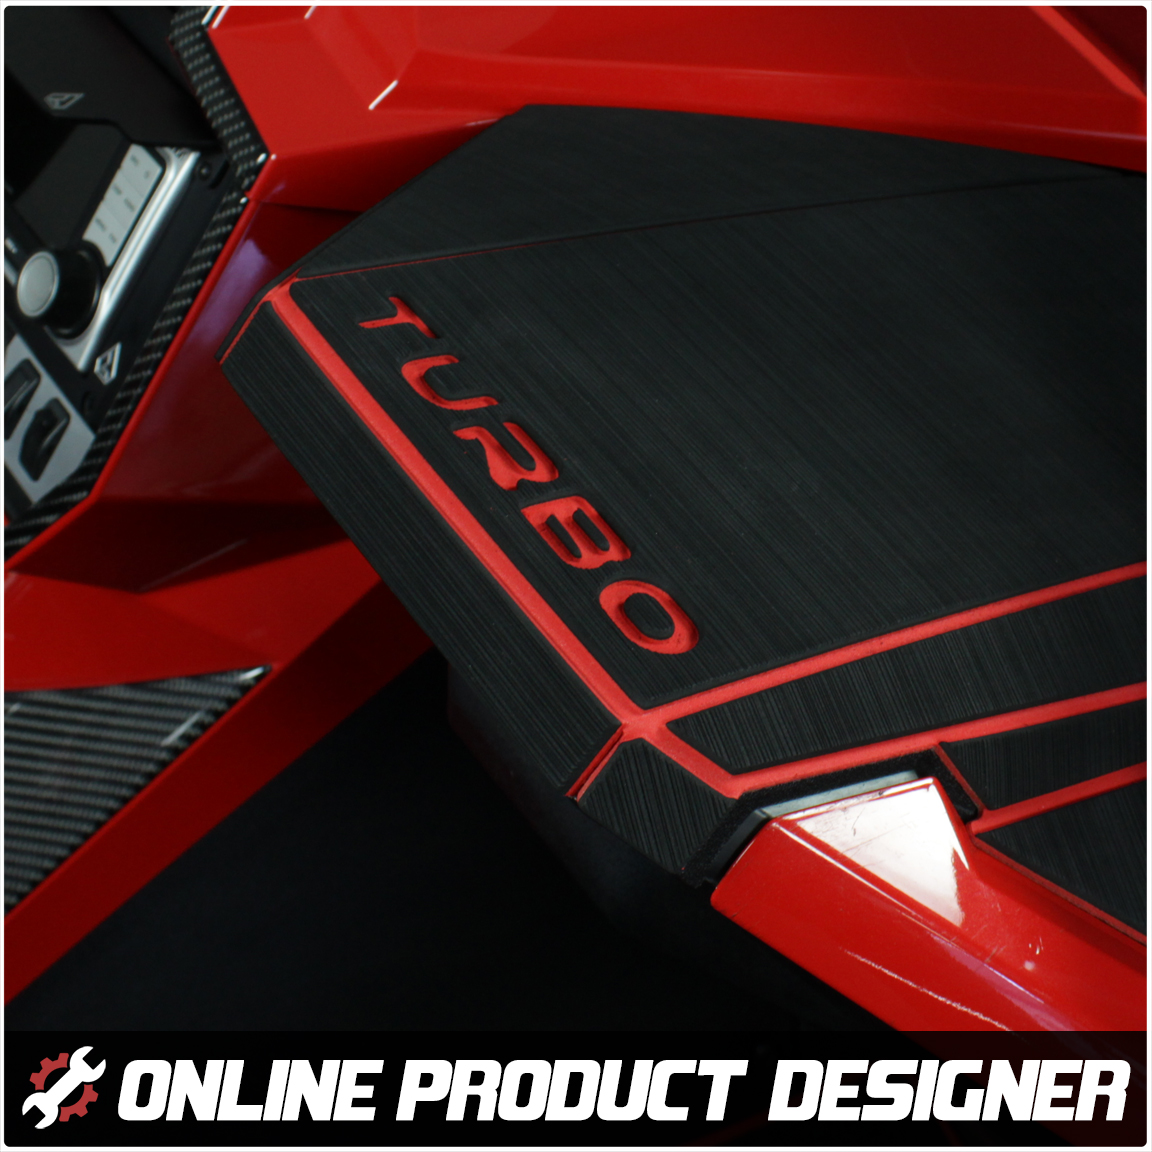 Foamskinz Dashboard Cover with Optional Custom Text Field for the Polaris Slingshot (Set of 2) (2015-19)